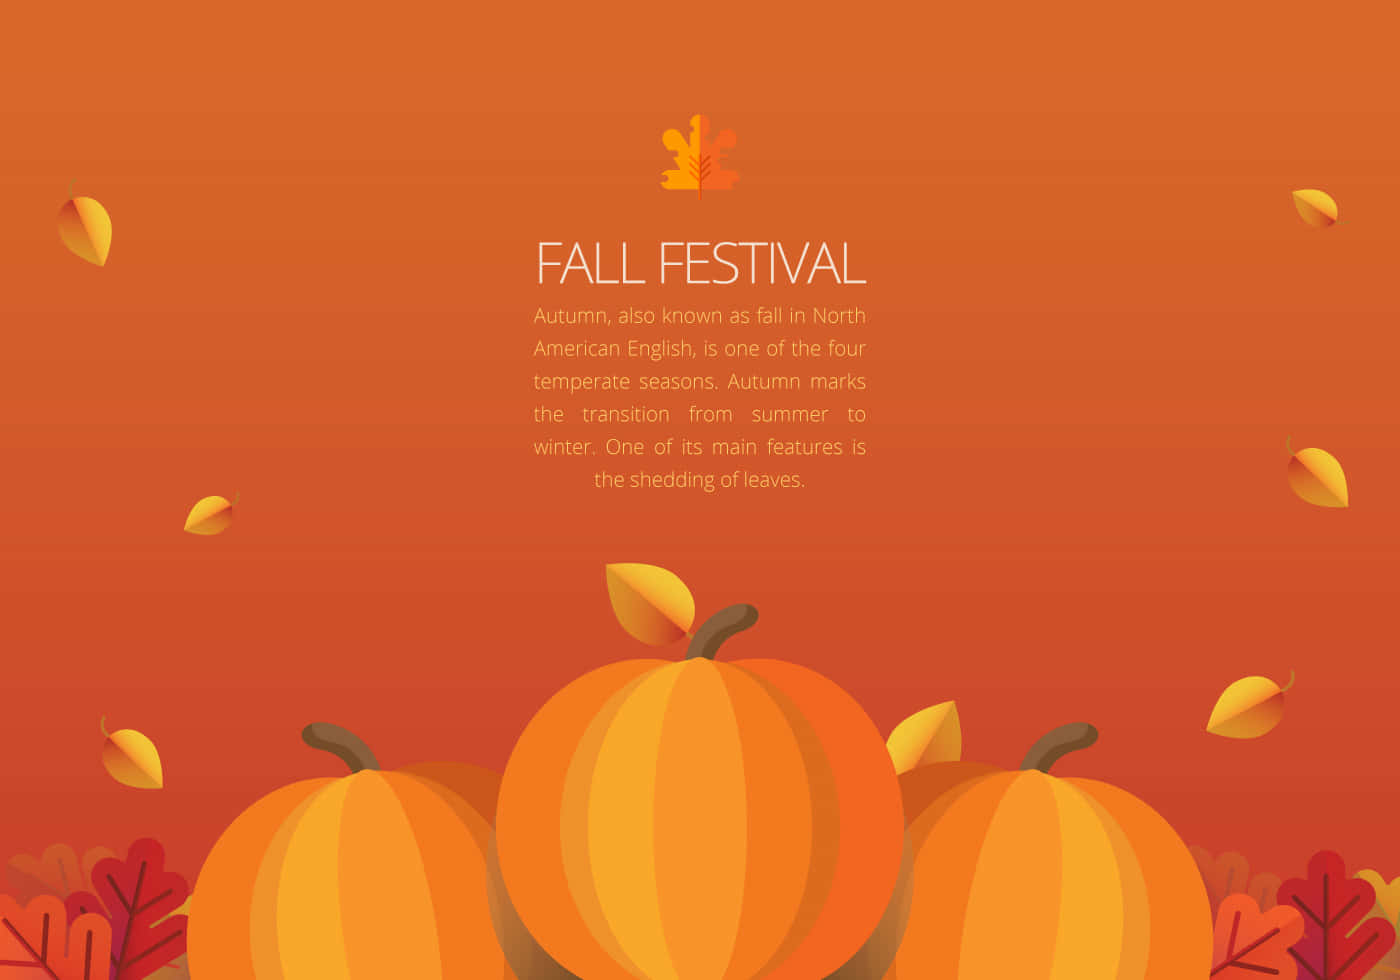 Excited families enjoying a vibrant Fall Festival Wallpaper